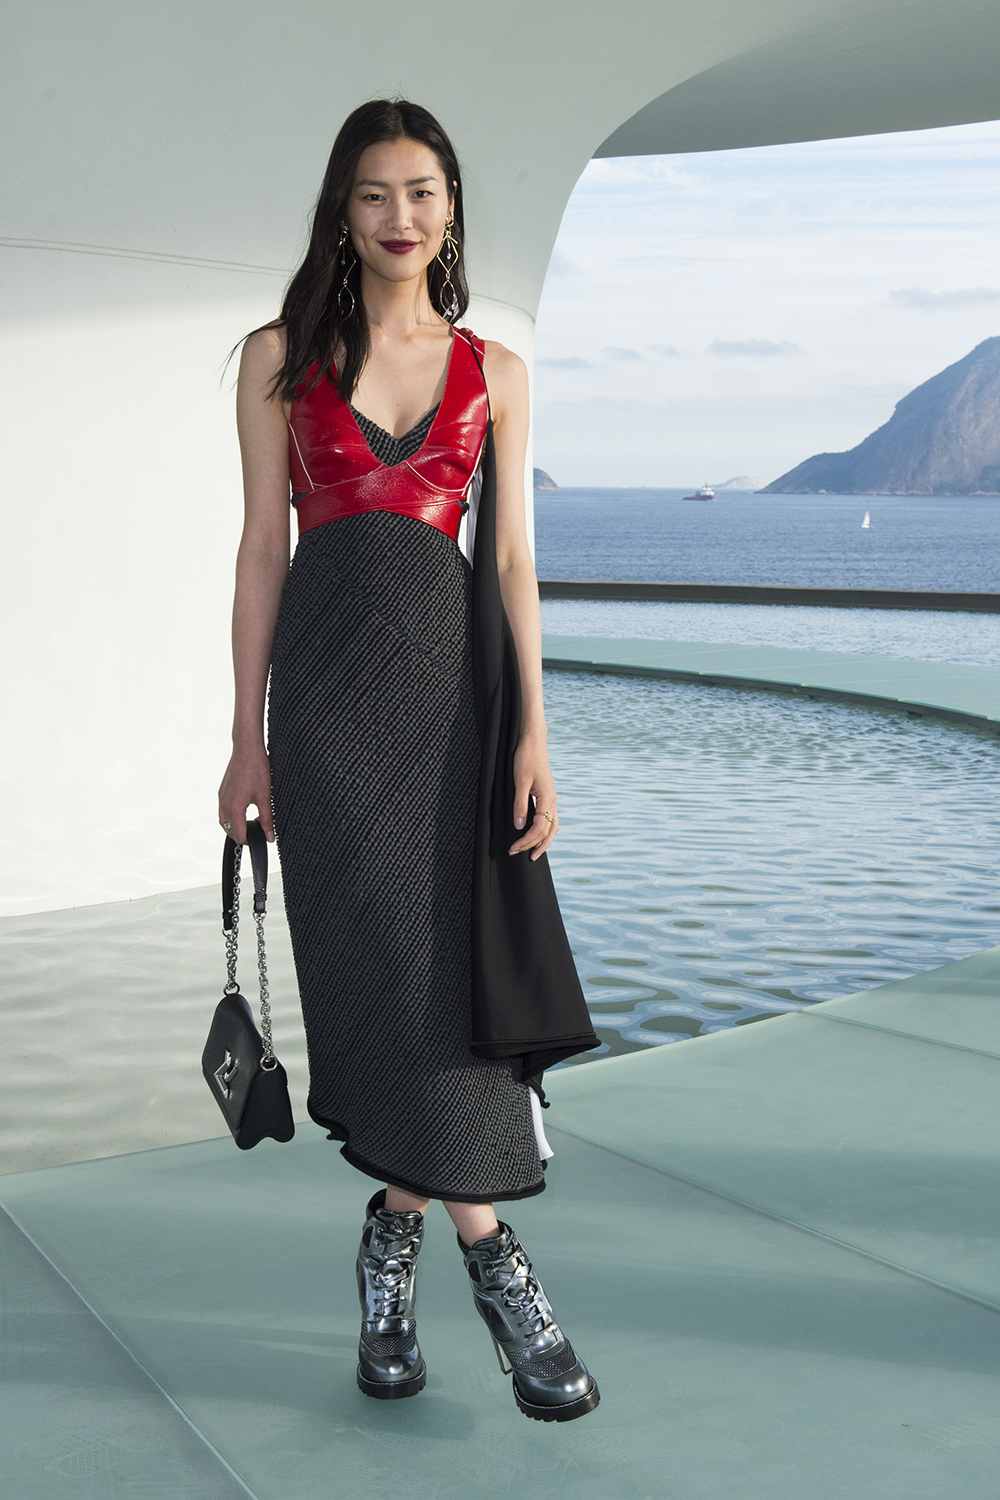 Liu Wen keeps things cool in a red Louis Vuitton crop top and dress at the French fashion house's 2017 Cruise collection in Rio.